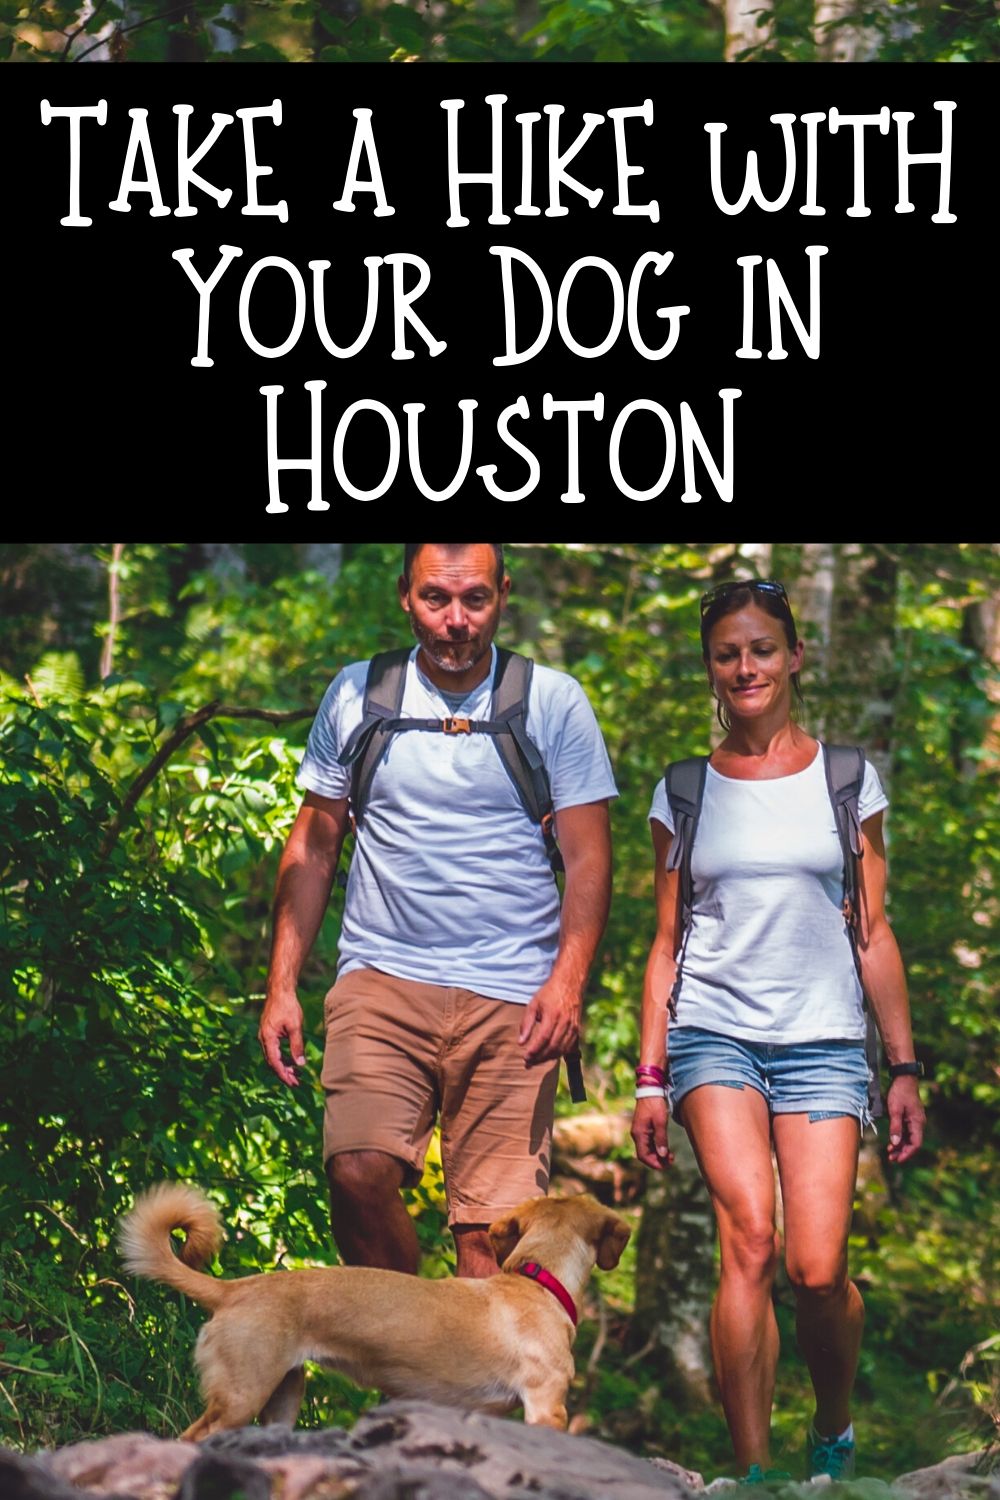 Are you looking for a reason to get out and enjoy the beautiful weather here in Houston? These Houston hiking spots you can visit with your dog will do the trick!